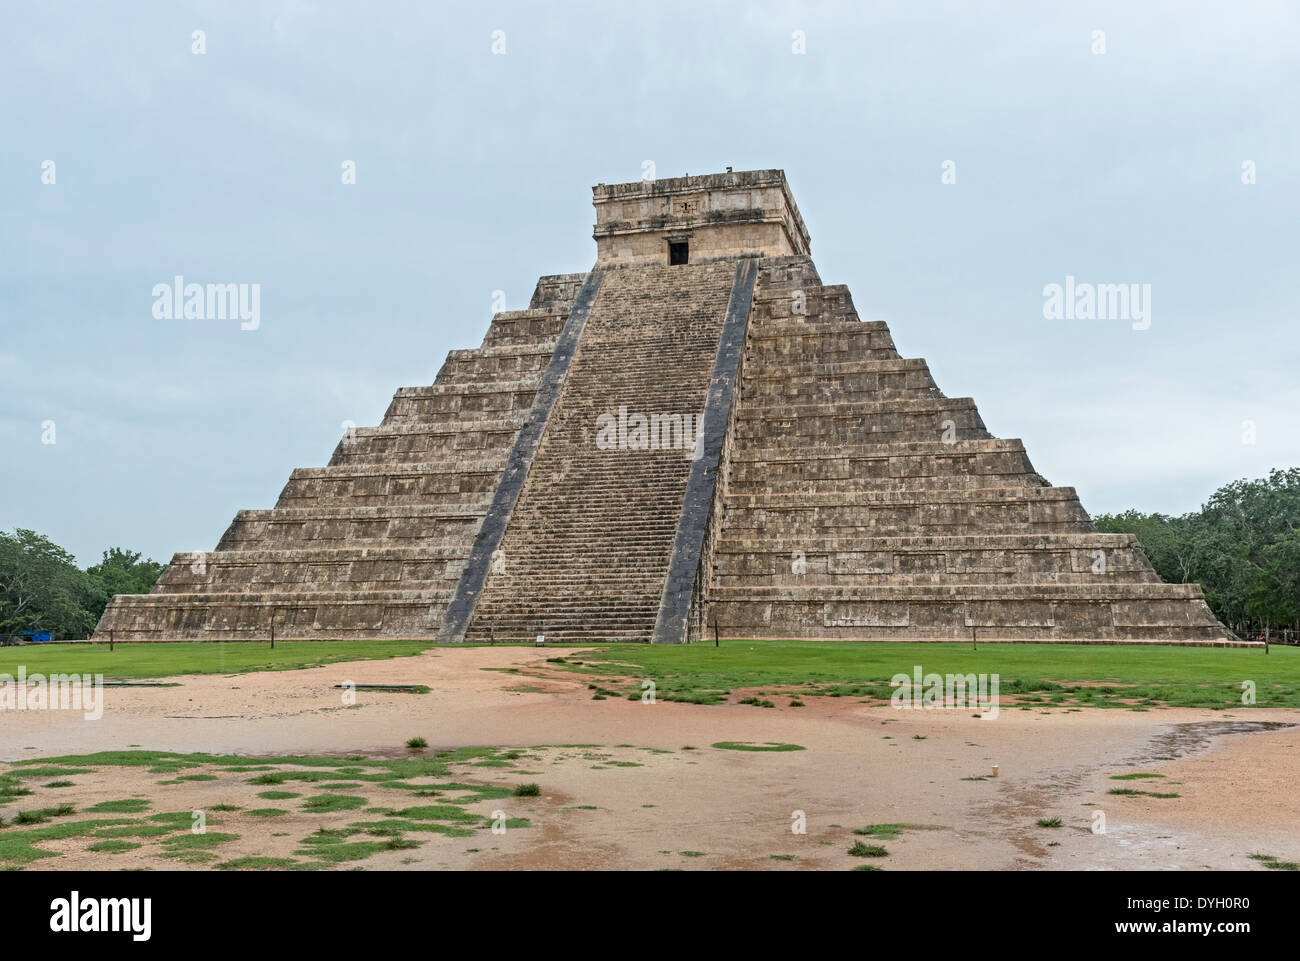 Yucatan, Mexico, September 1, 2013: The most famous icon in Mexico, the Kukulkan pyramid in Chichen Itza archeological park. Stock Photo